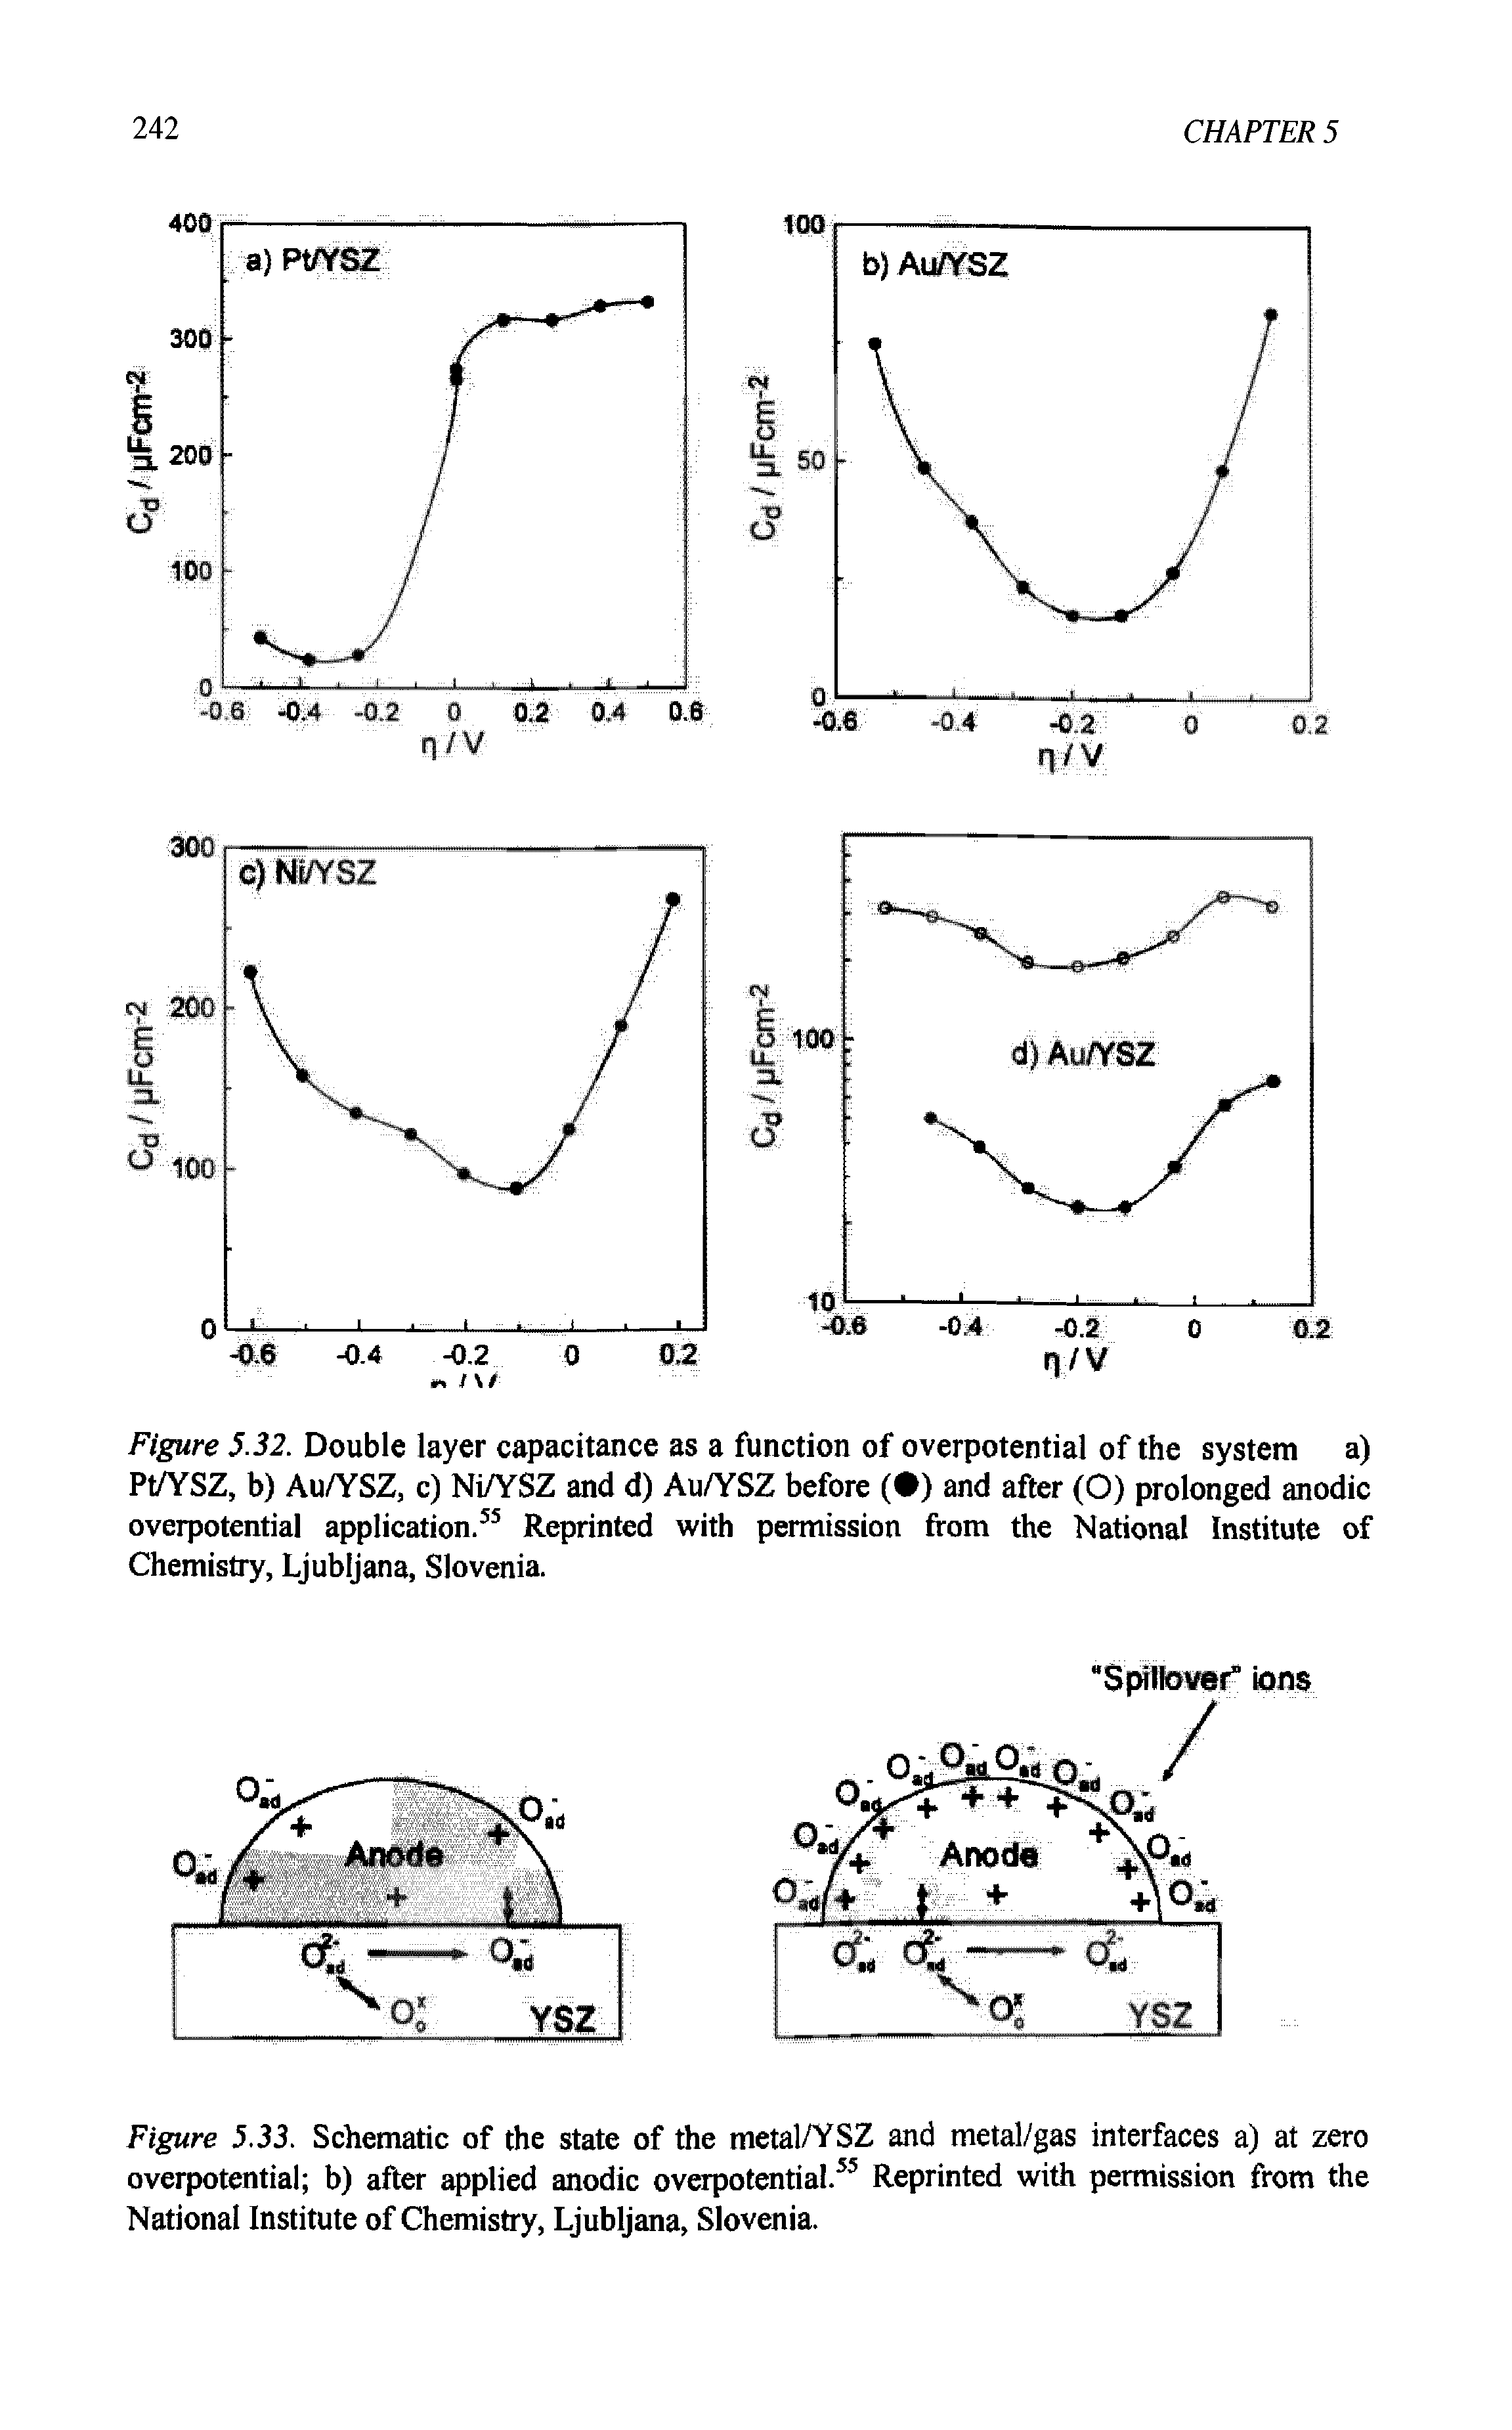 Figure 5.32. Double layer capacitance as a function of overpotential of the system a) Pt/YSZ, b) Au/YSZ, c) Ni/YSZ and d) Au/YSZ before ( ) and after (O) prolonged anodic overpotential application.55 Reprinted with permission from the National Institute of Chemistry, Ljubljana, Slovenia.